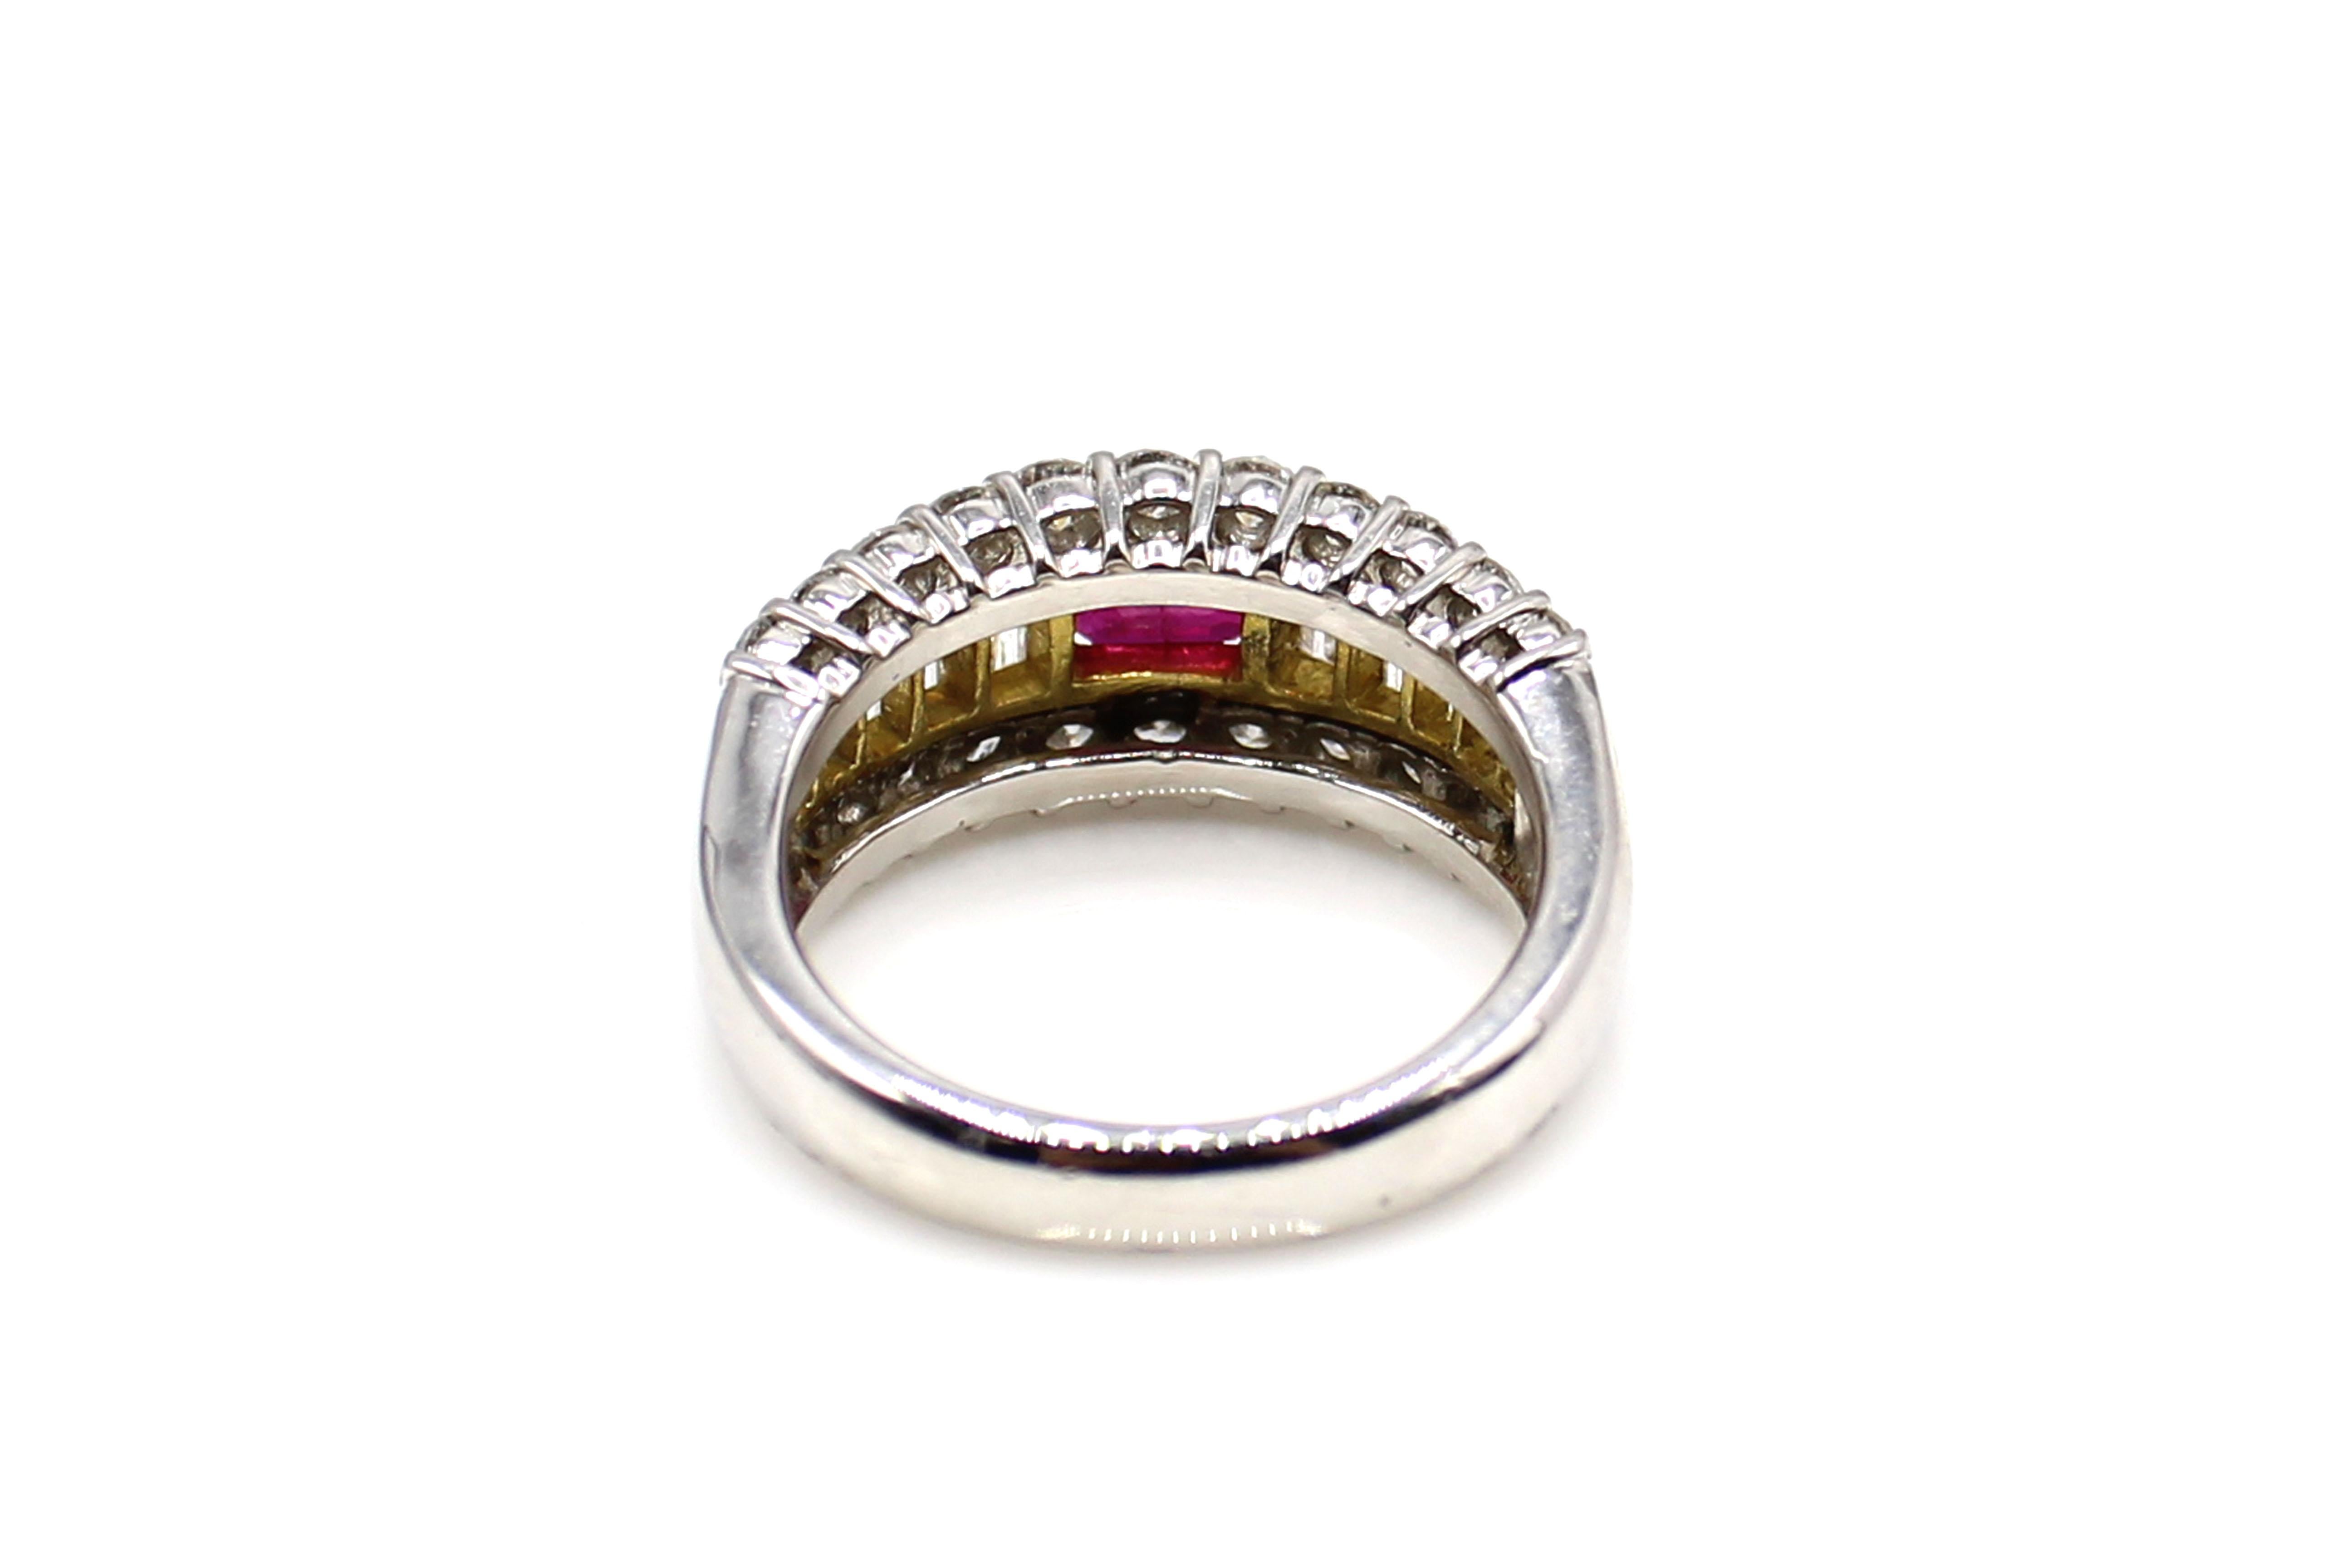 Beautifully designed and masterfully hand-crafted this ring features a centrally set square emerald cut deep red lively ruby securely held in between 2 bars of high polished 18 karat yellow gold. The ruby is embellished by 22 bright white and